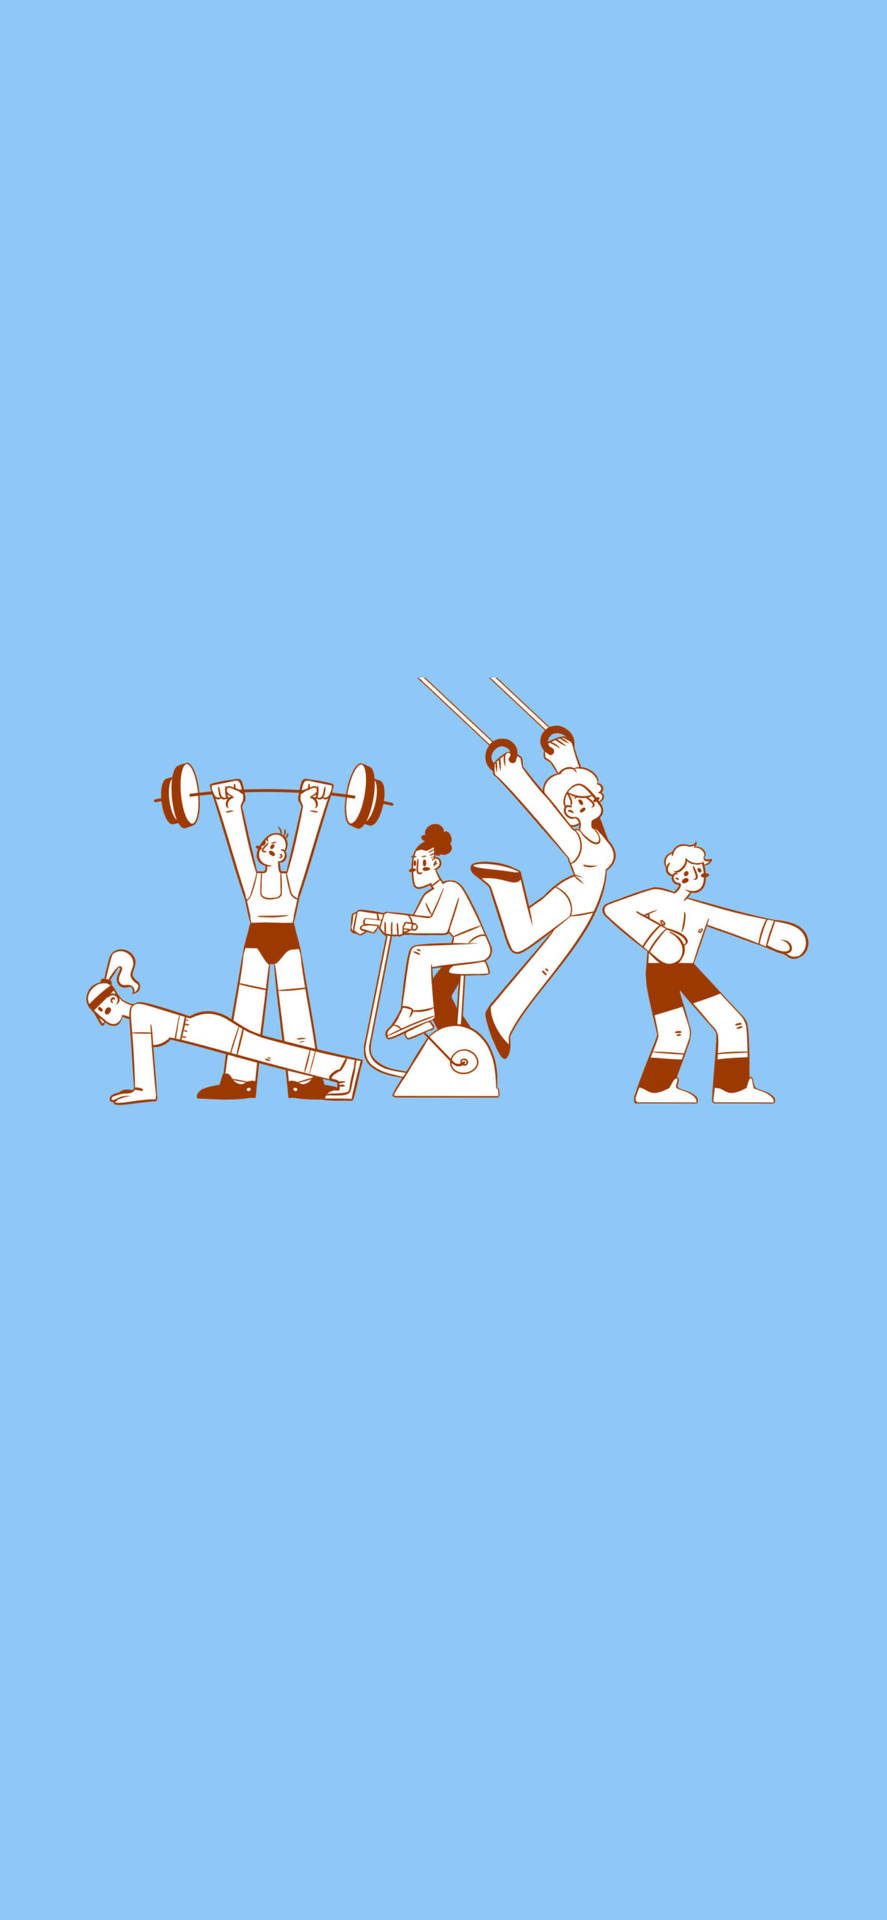 Exercise With Gym Buddies Pastel Blue Background